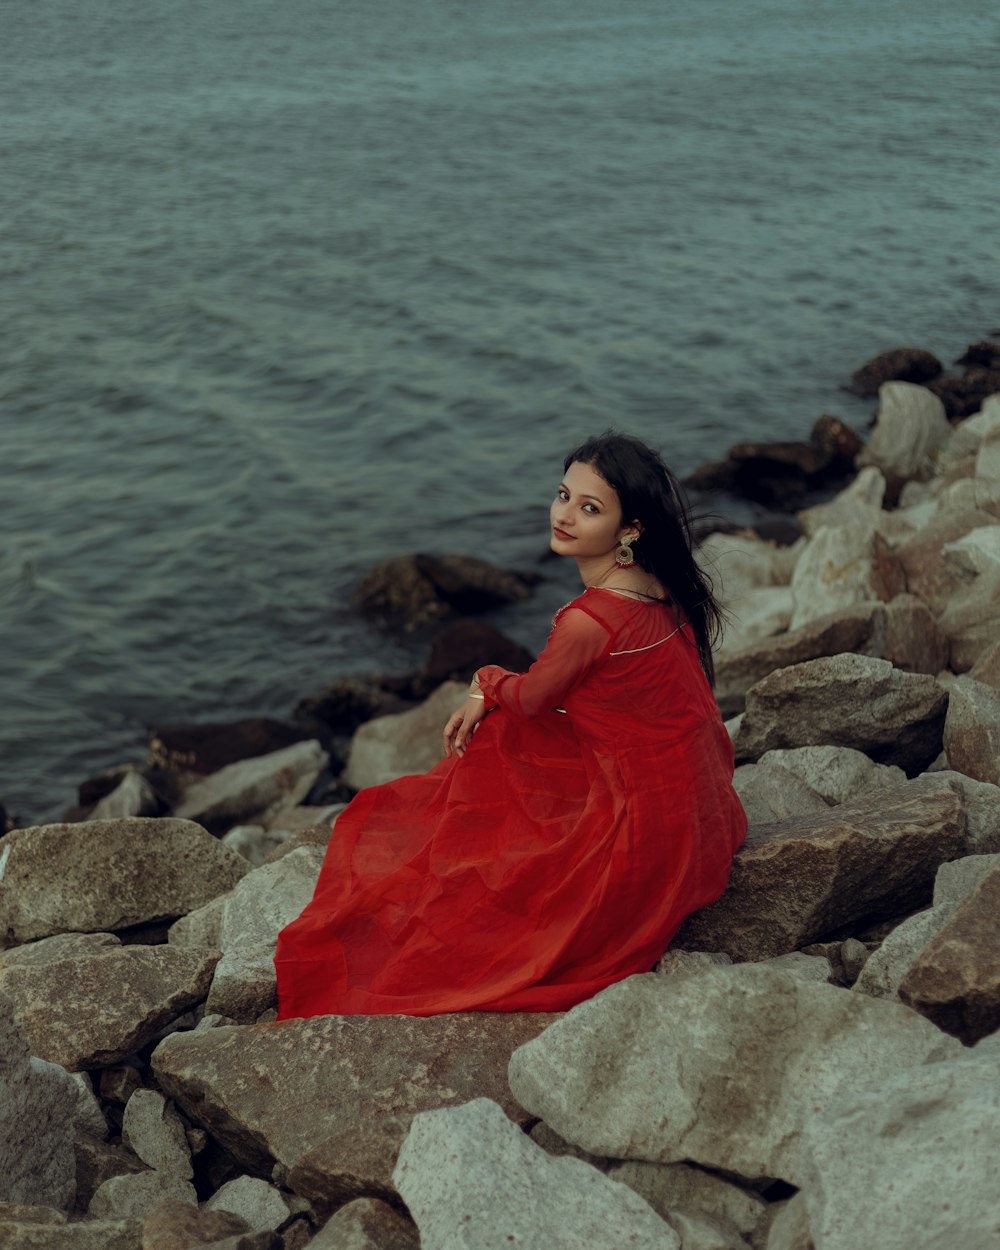 a woman in a red dress sitting on rocks by the water